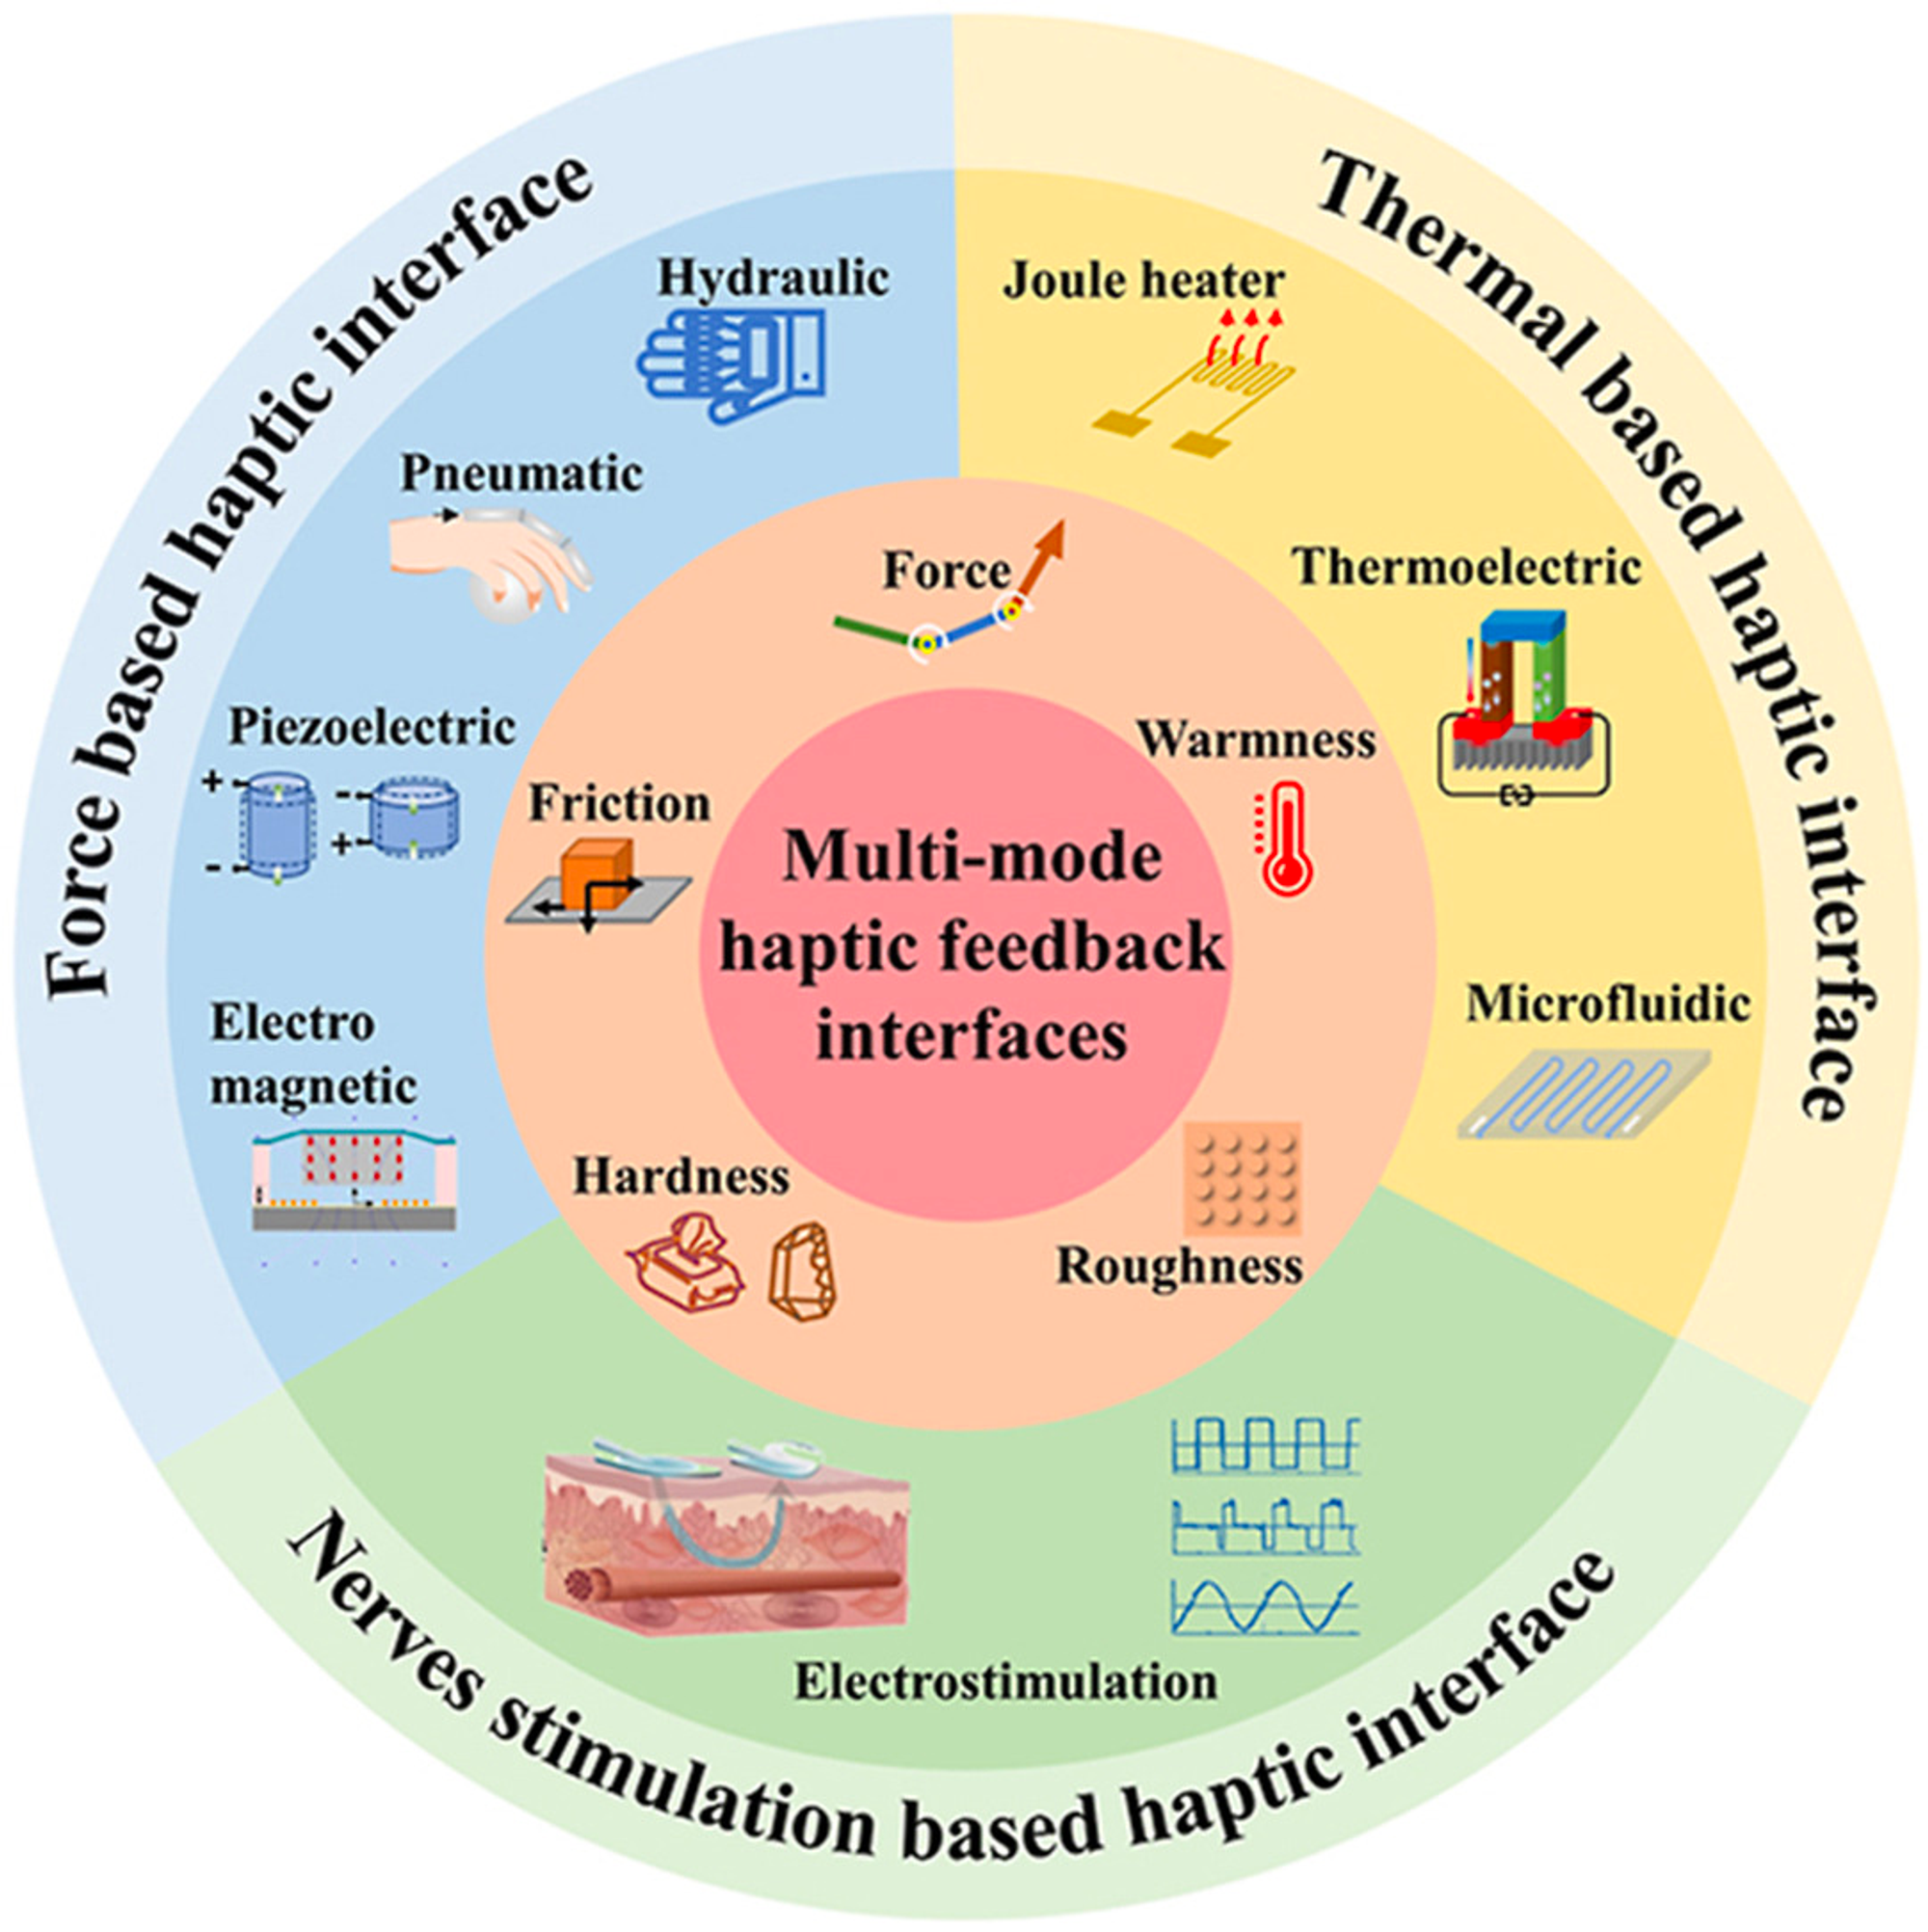 Recent advances in multi-mode haptic feedback technologies towards wearable interfaces